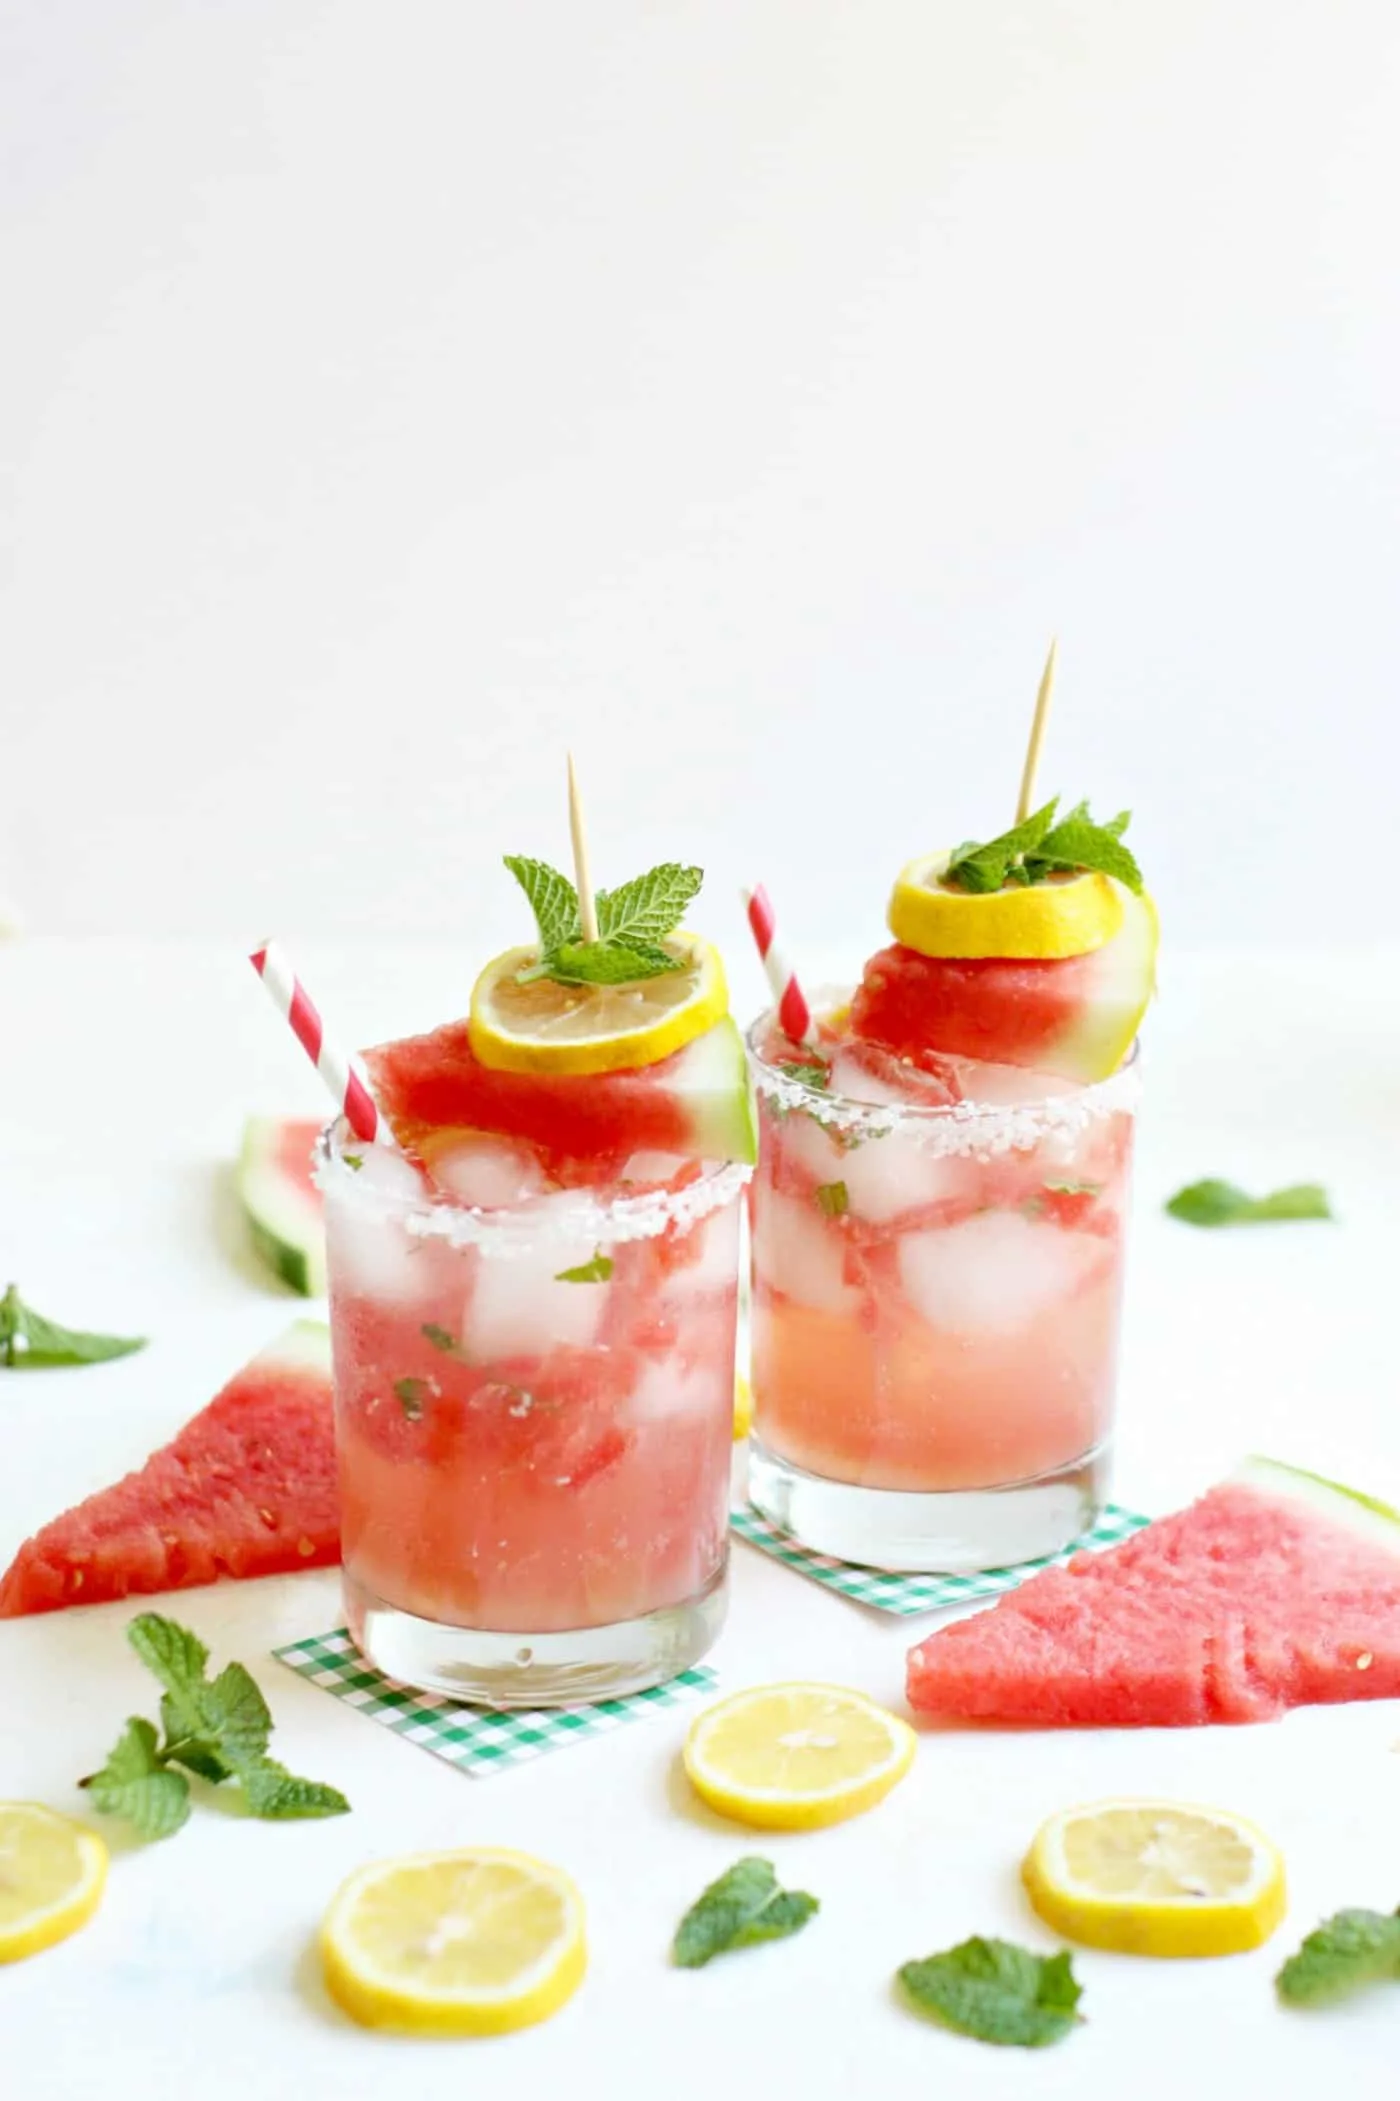 This homemade lemonade recipe combines some of the most delicious flavors of summer: sweet watermelon, tart lemon, and the cool flavor of mint!